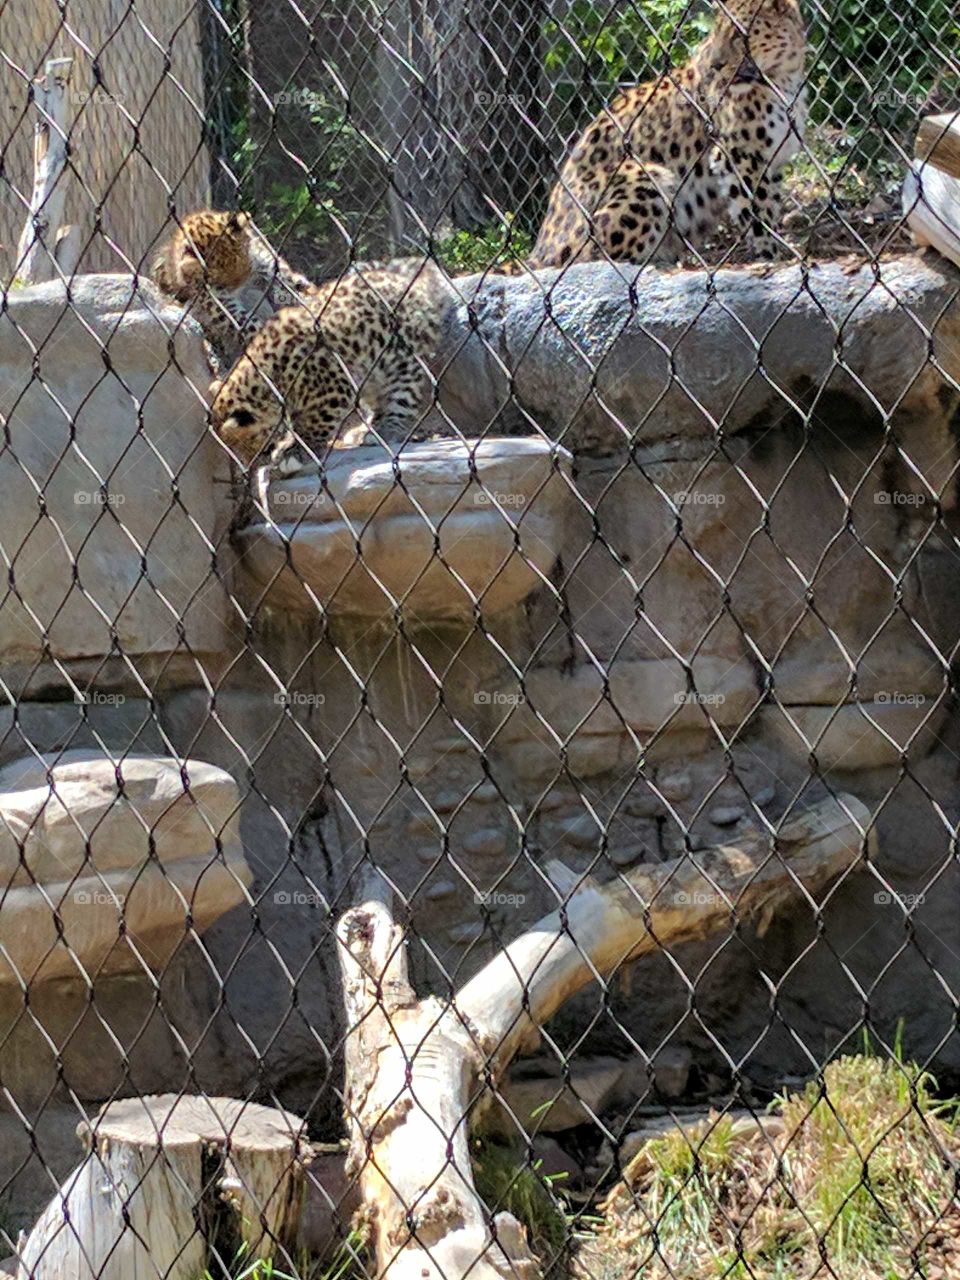 Momma Leopard and Baby Leopards